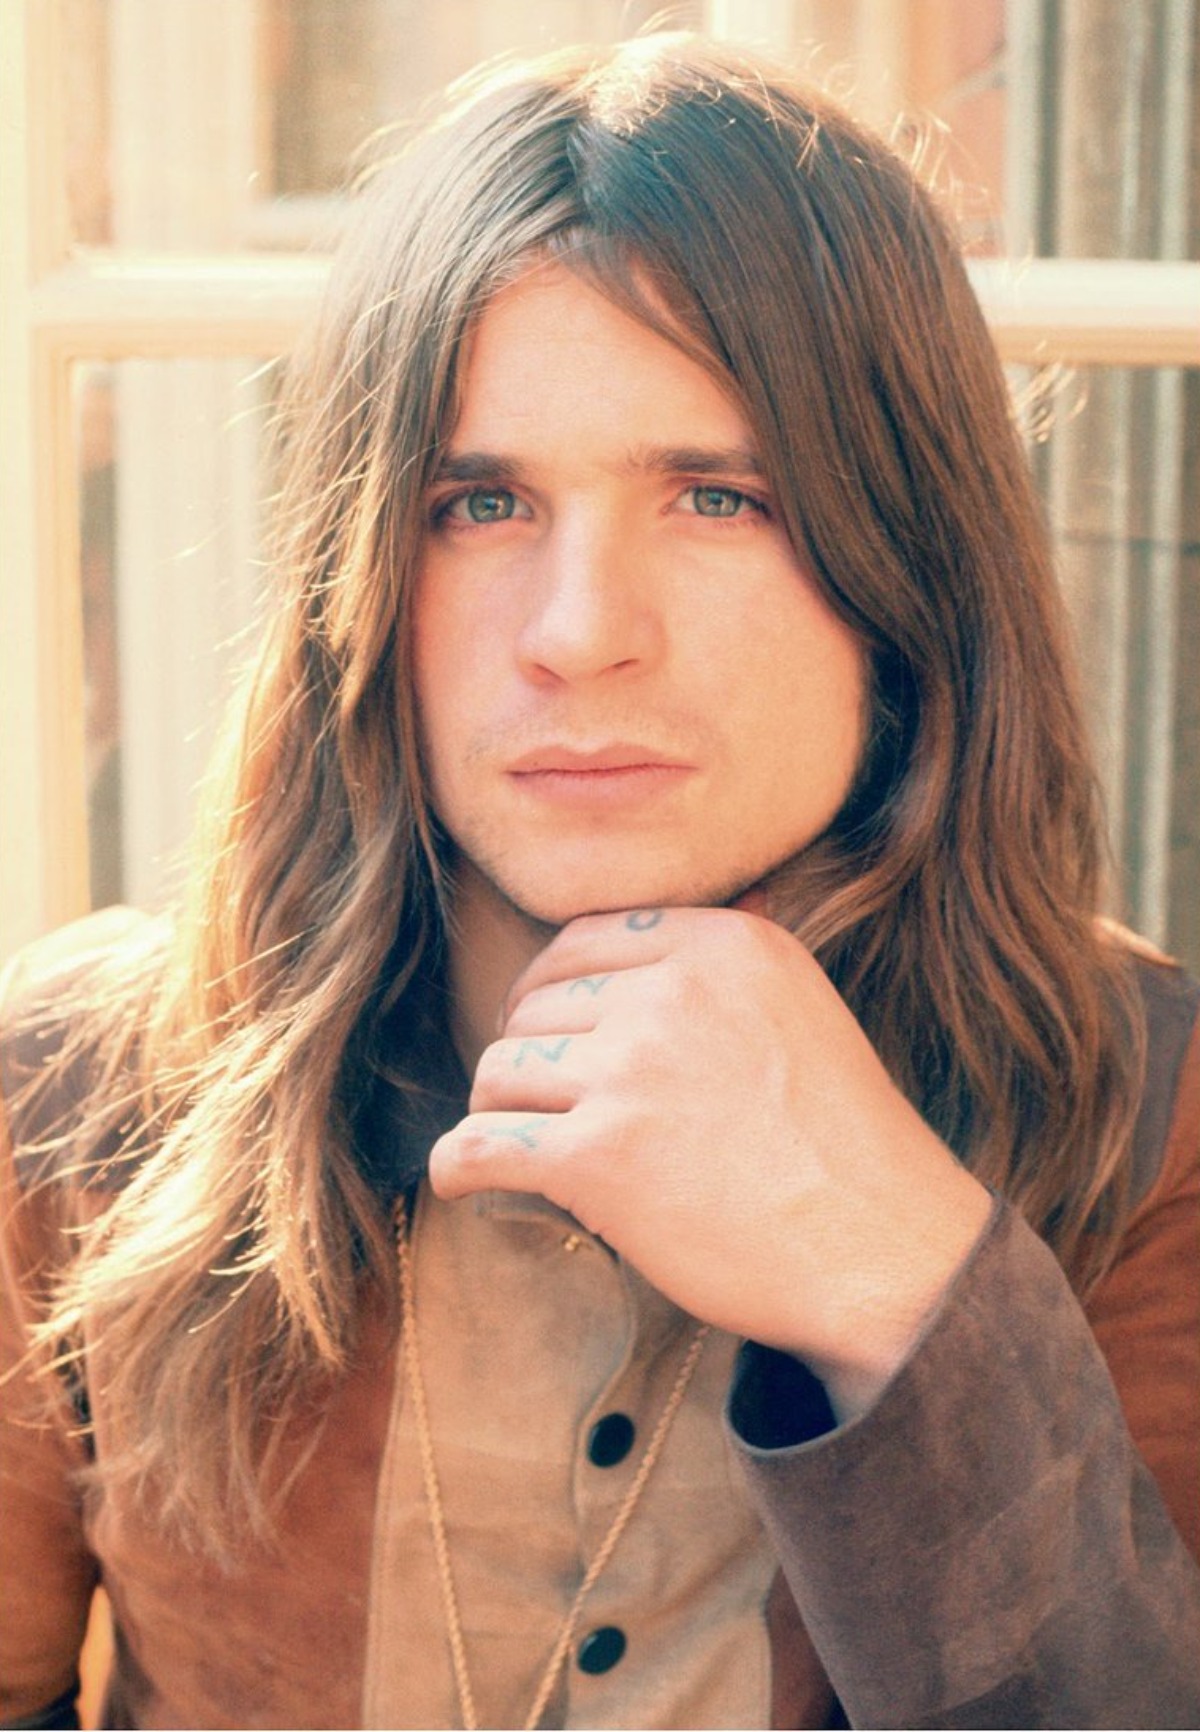 Ozzy Osbourne as a young man